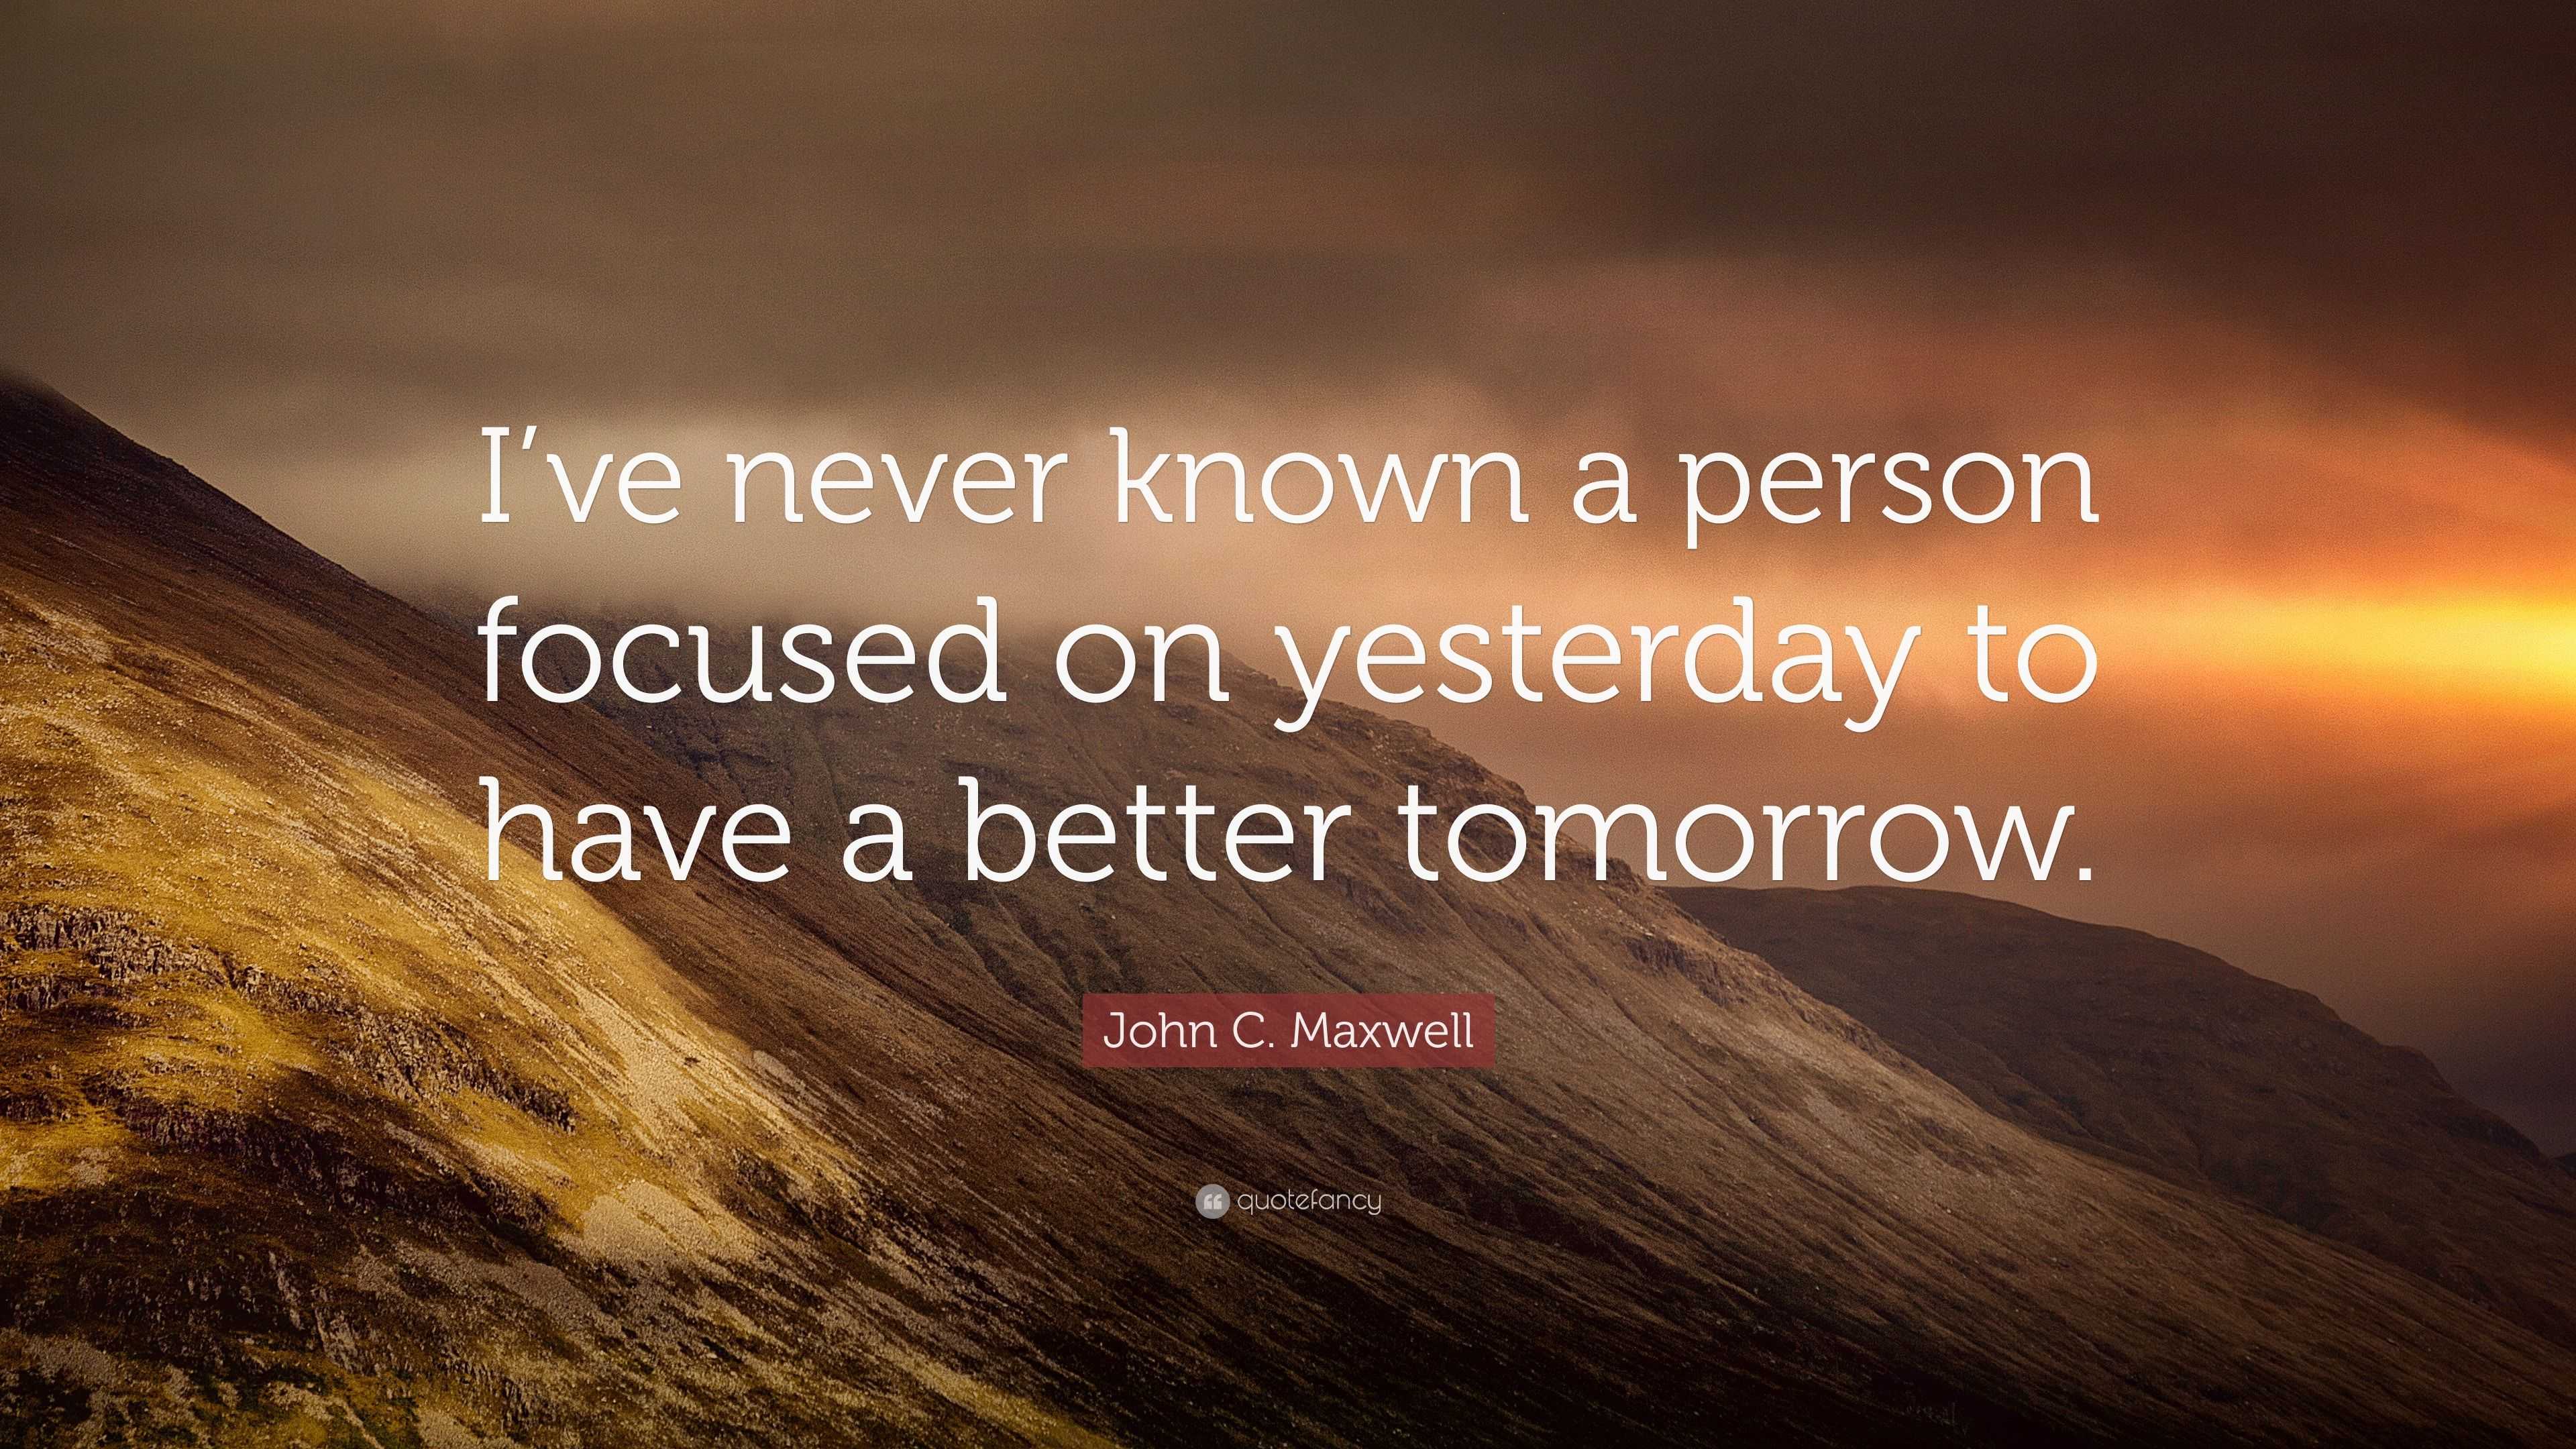 John C. Maxwell Quote: “I’ve never known a person focused on yesterday ...